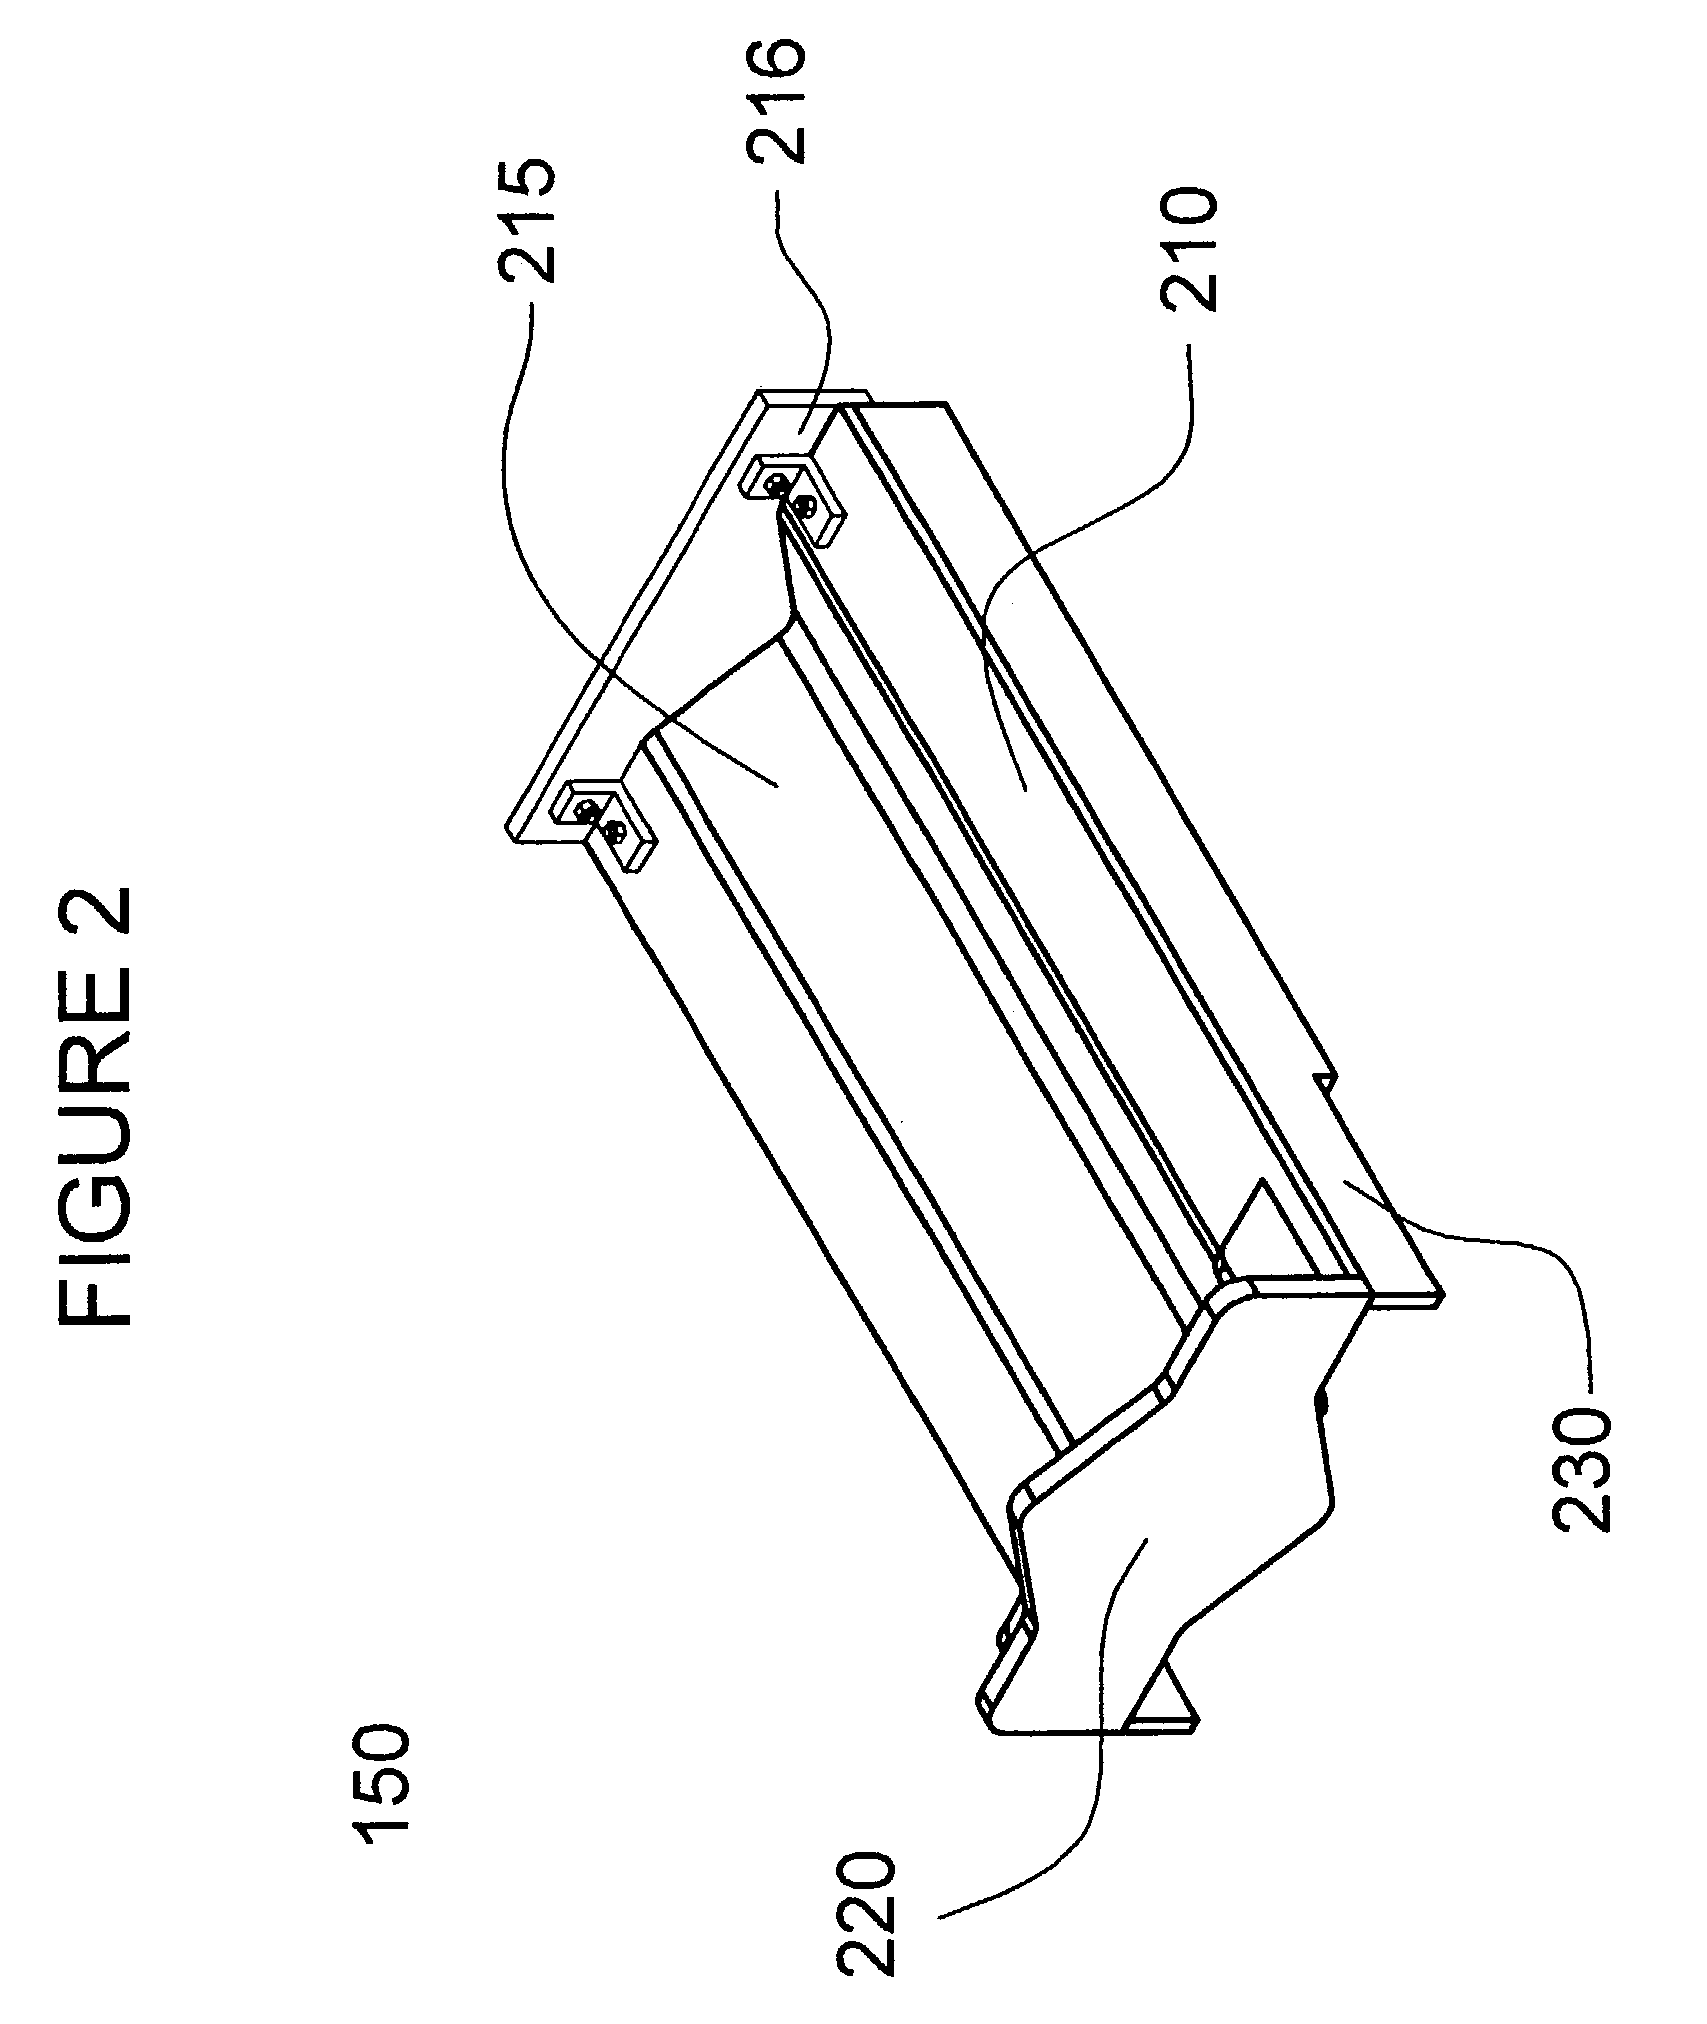 Pipe handling apparatus for presenting sections of pipe to a derrick work floor having a high-speed carriage assembly